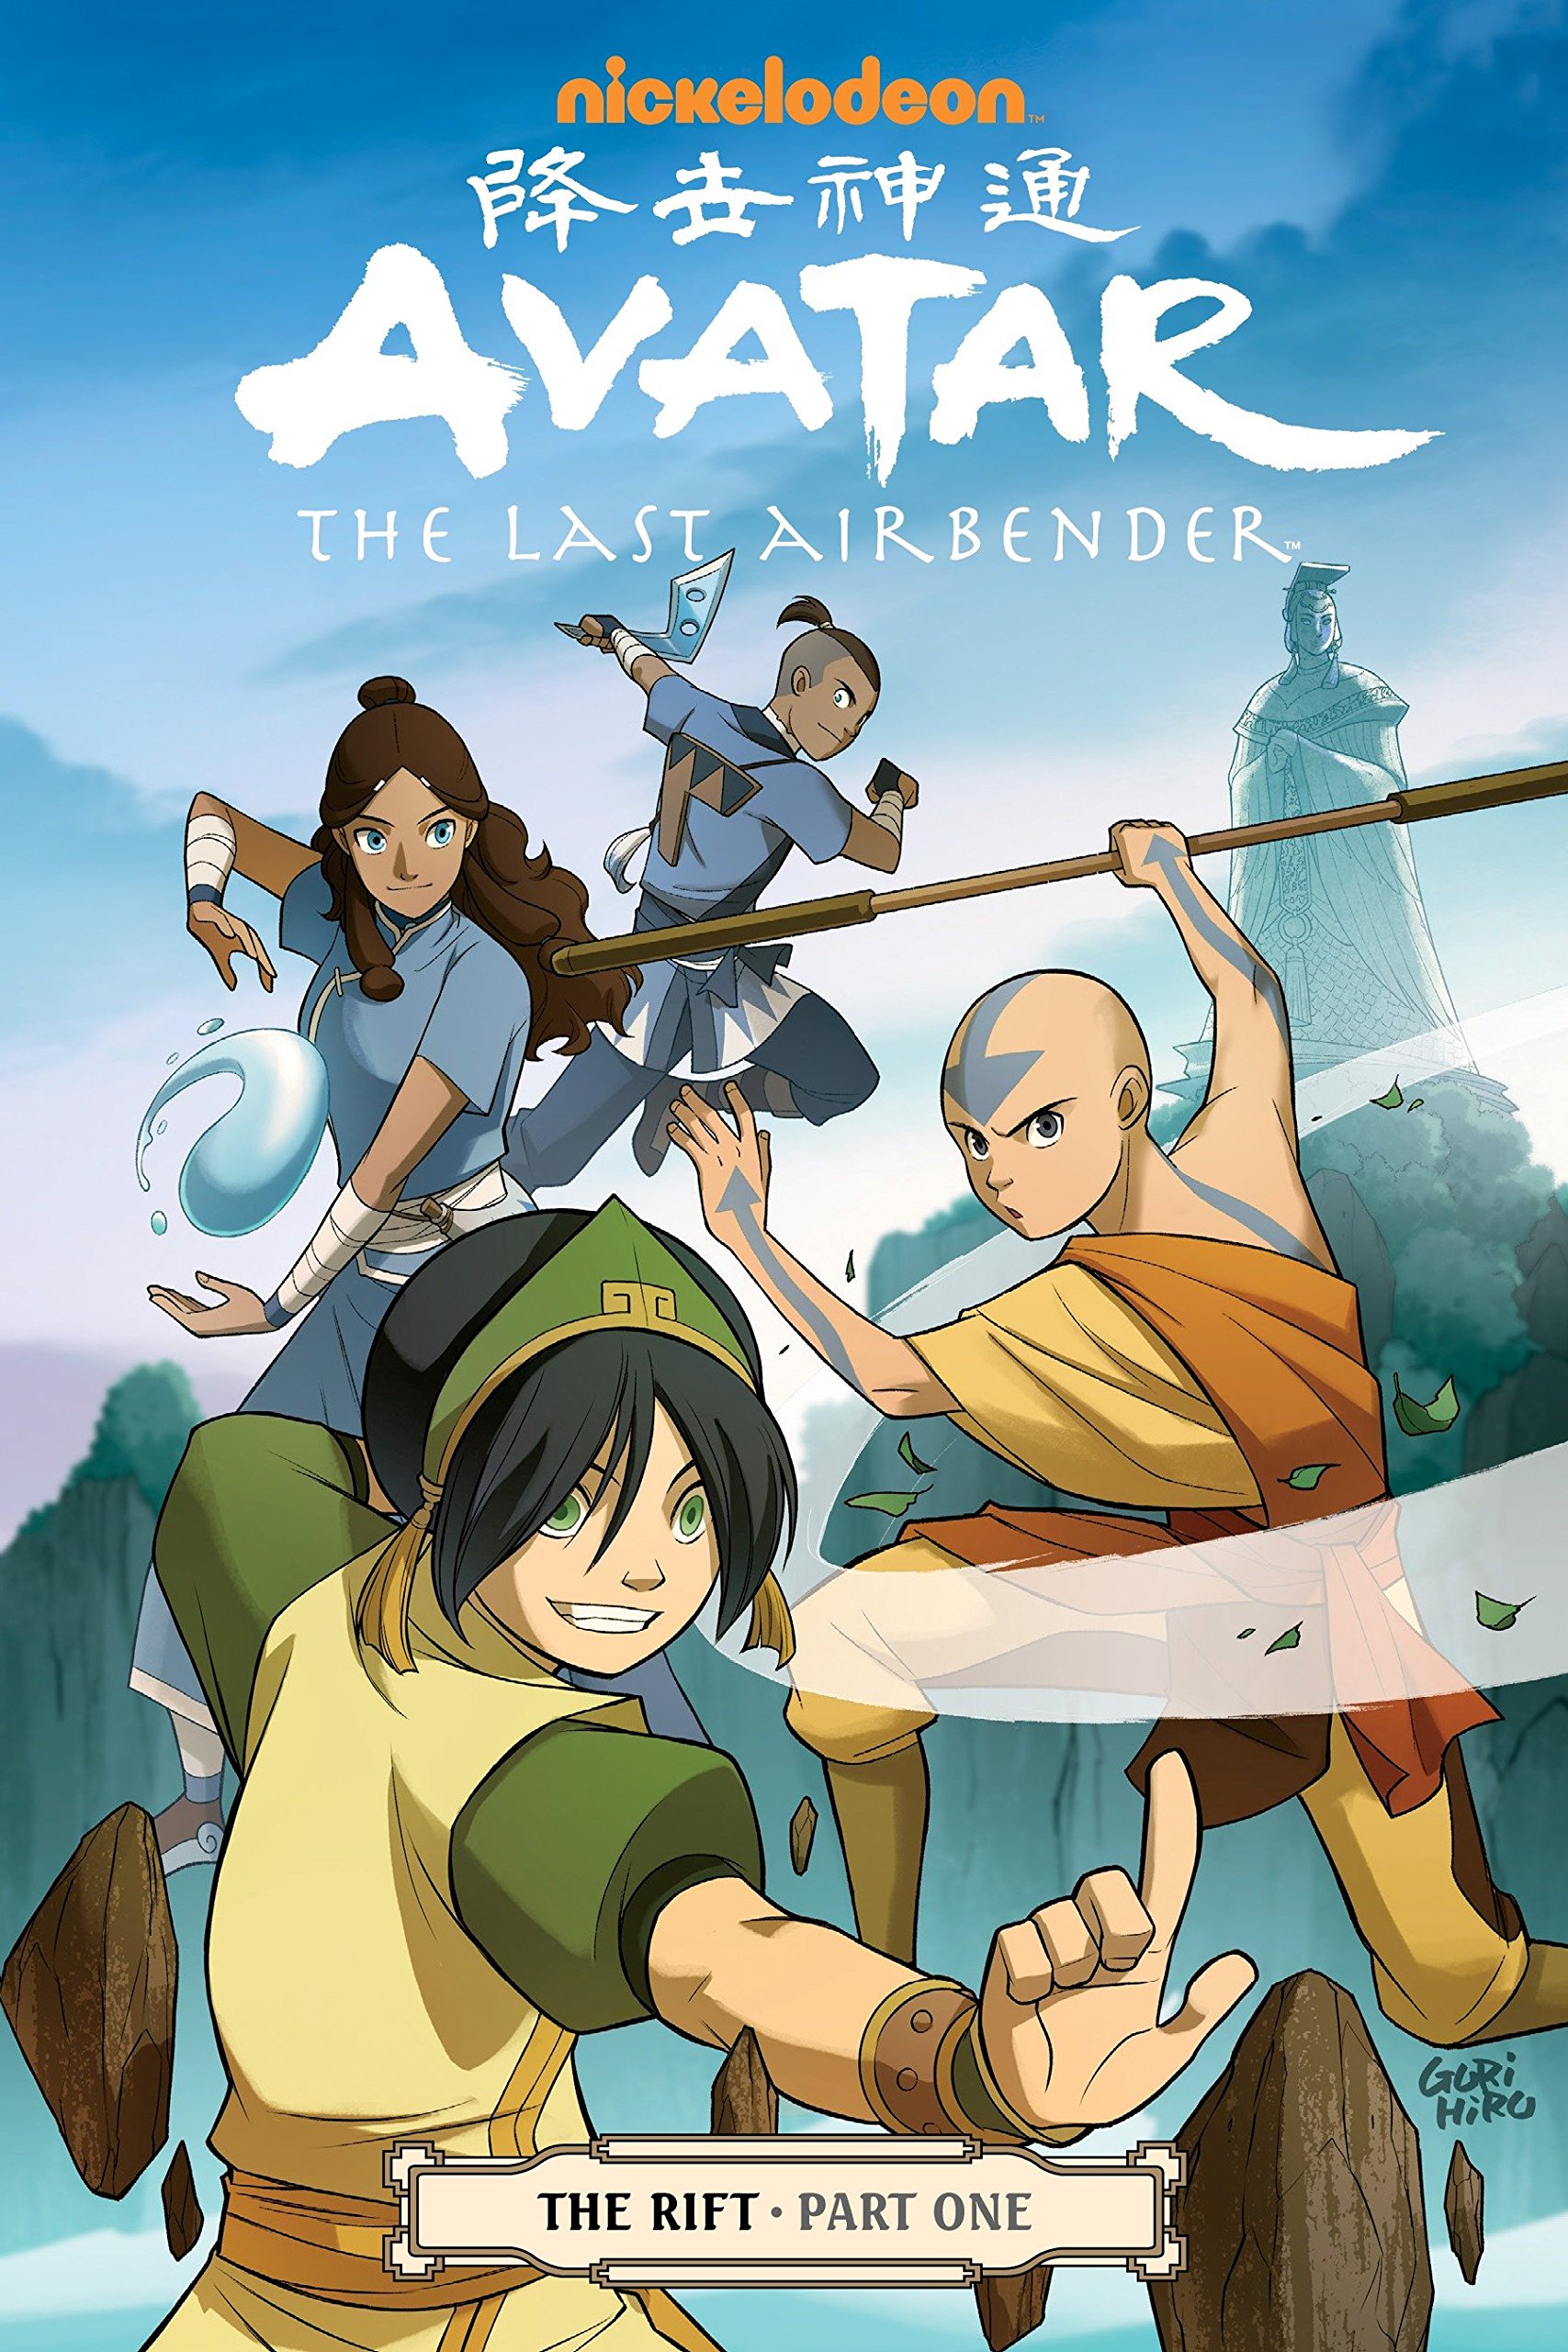 Avatar the Last Airbender The Complete Book 1 Collection DVD box set   eBay